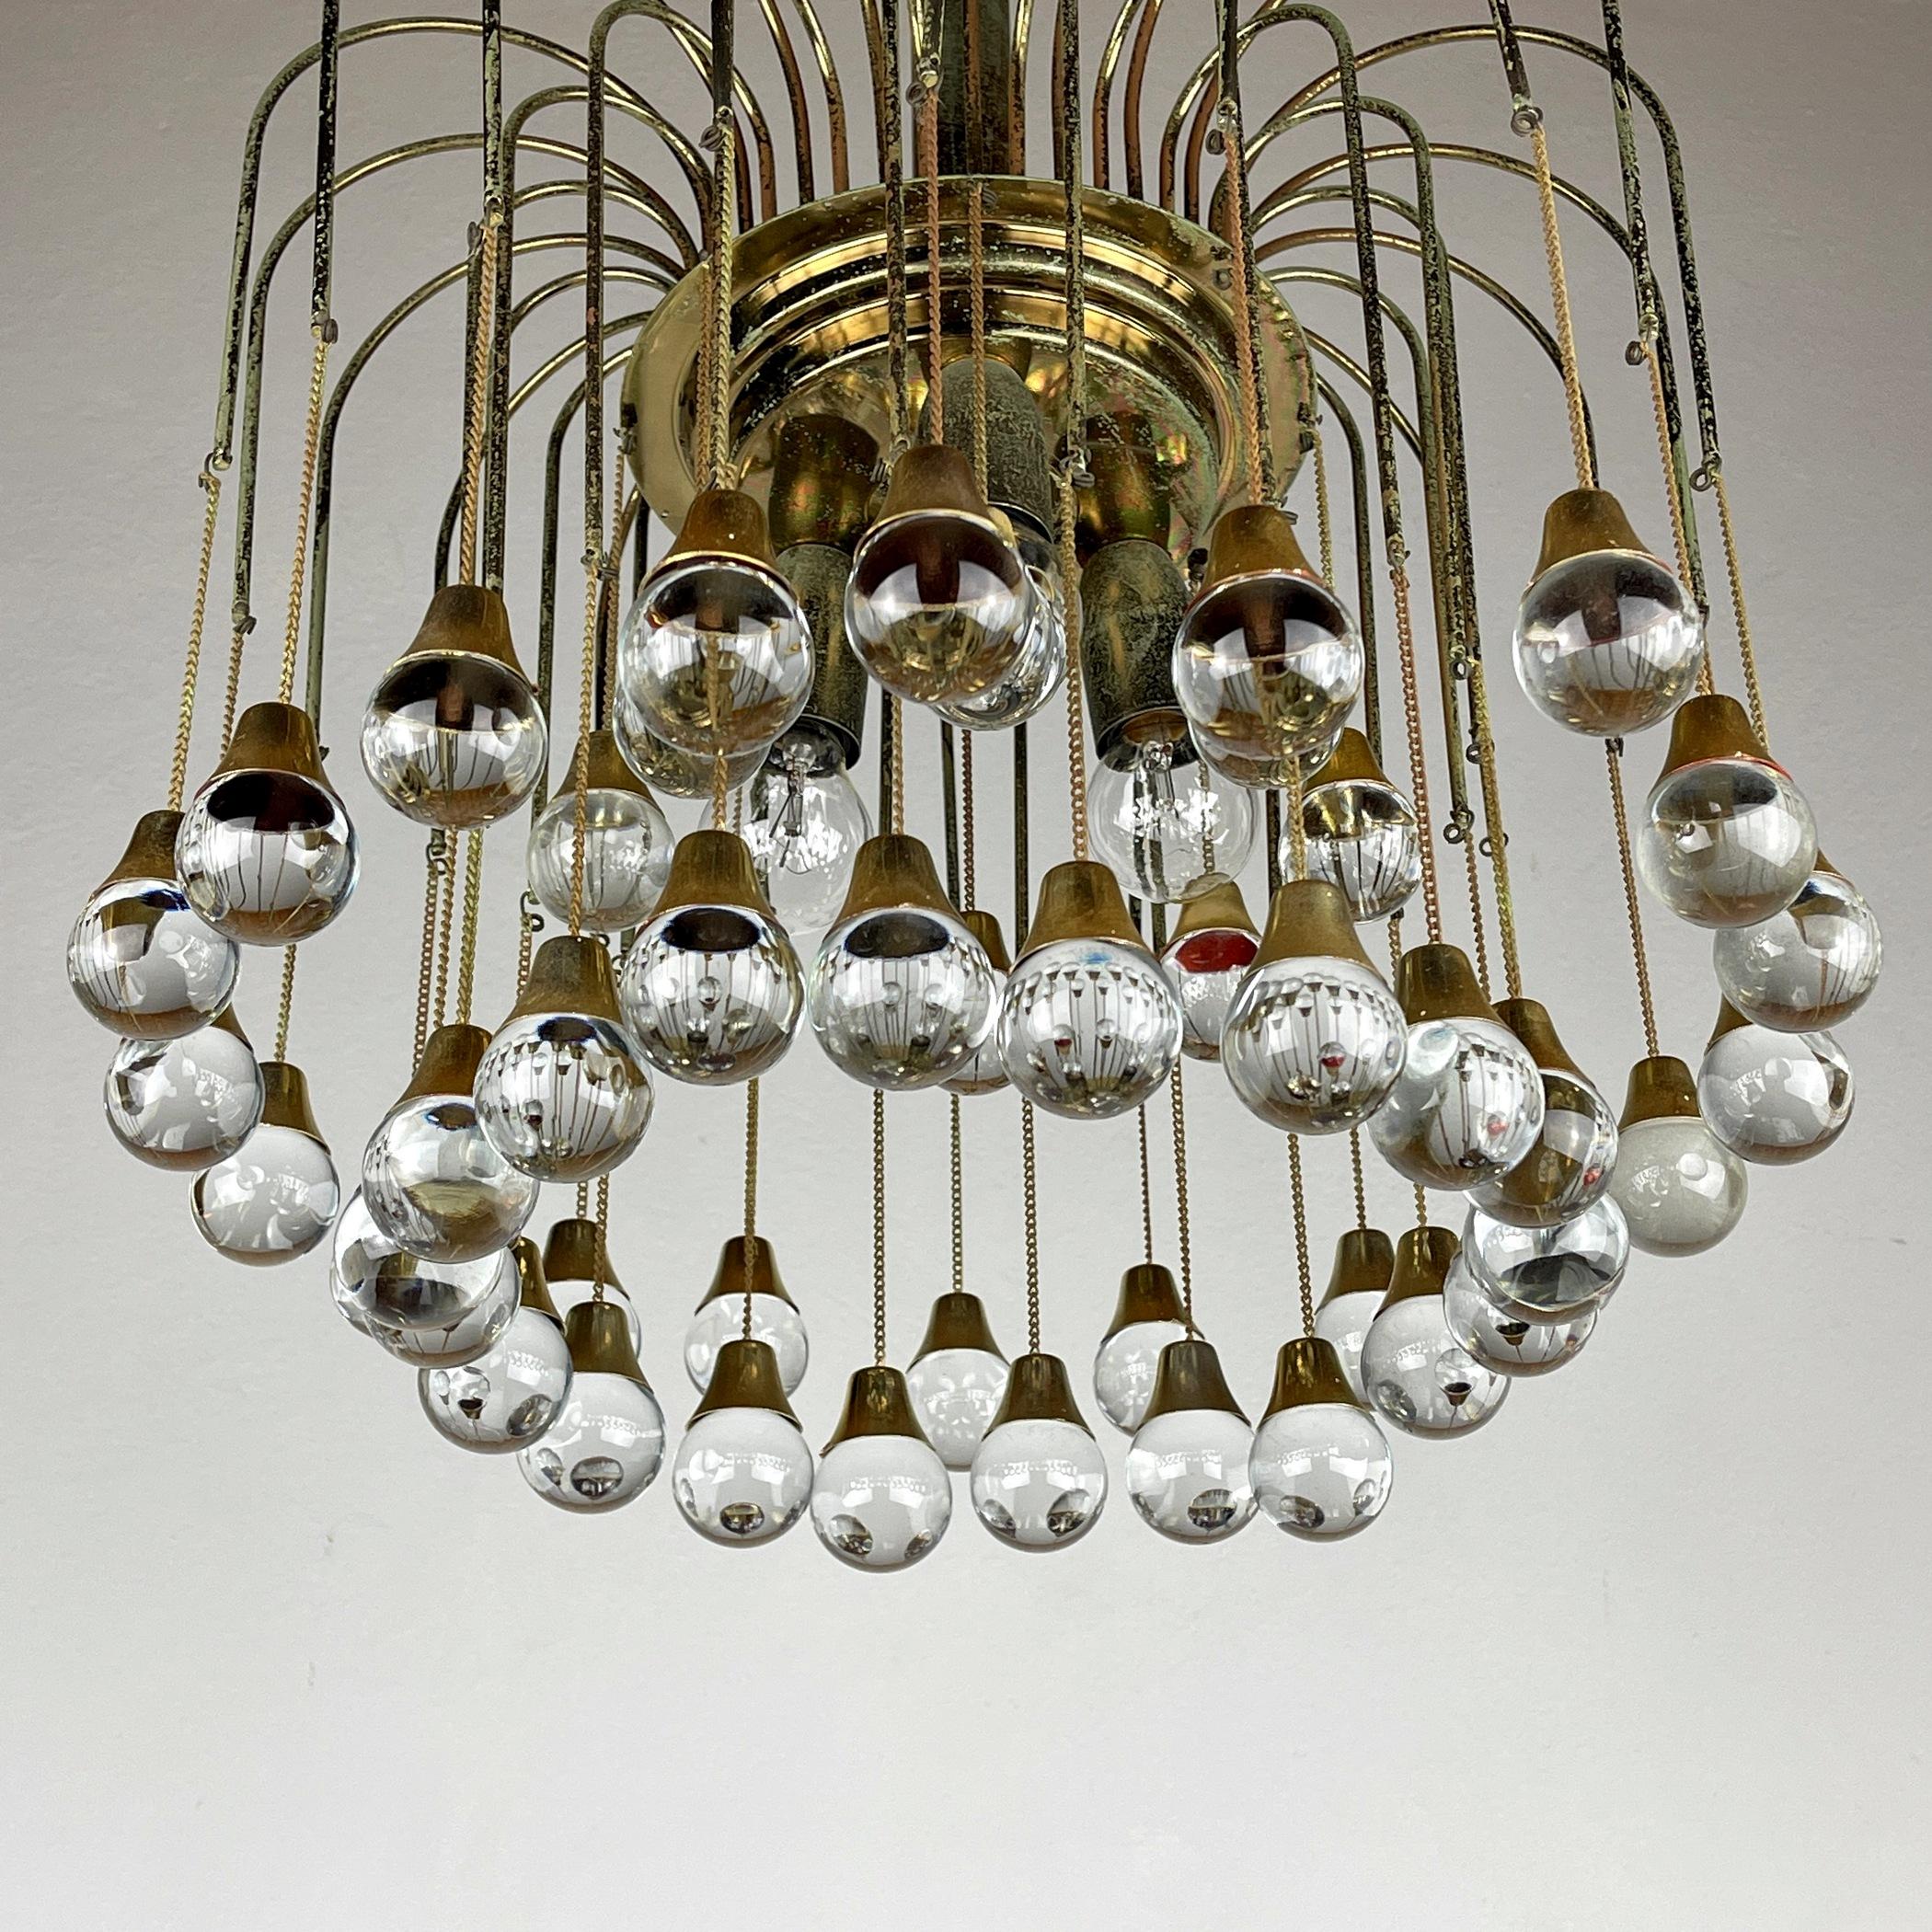 Vintage Cascade Glass Chandelier Italy 1960s Brass and 48 Glass Balls 3